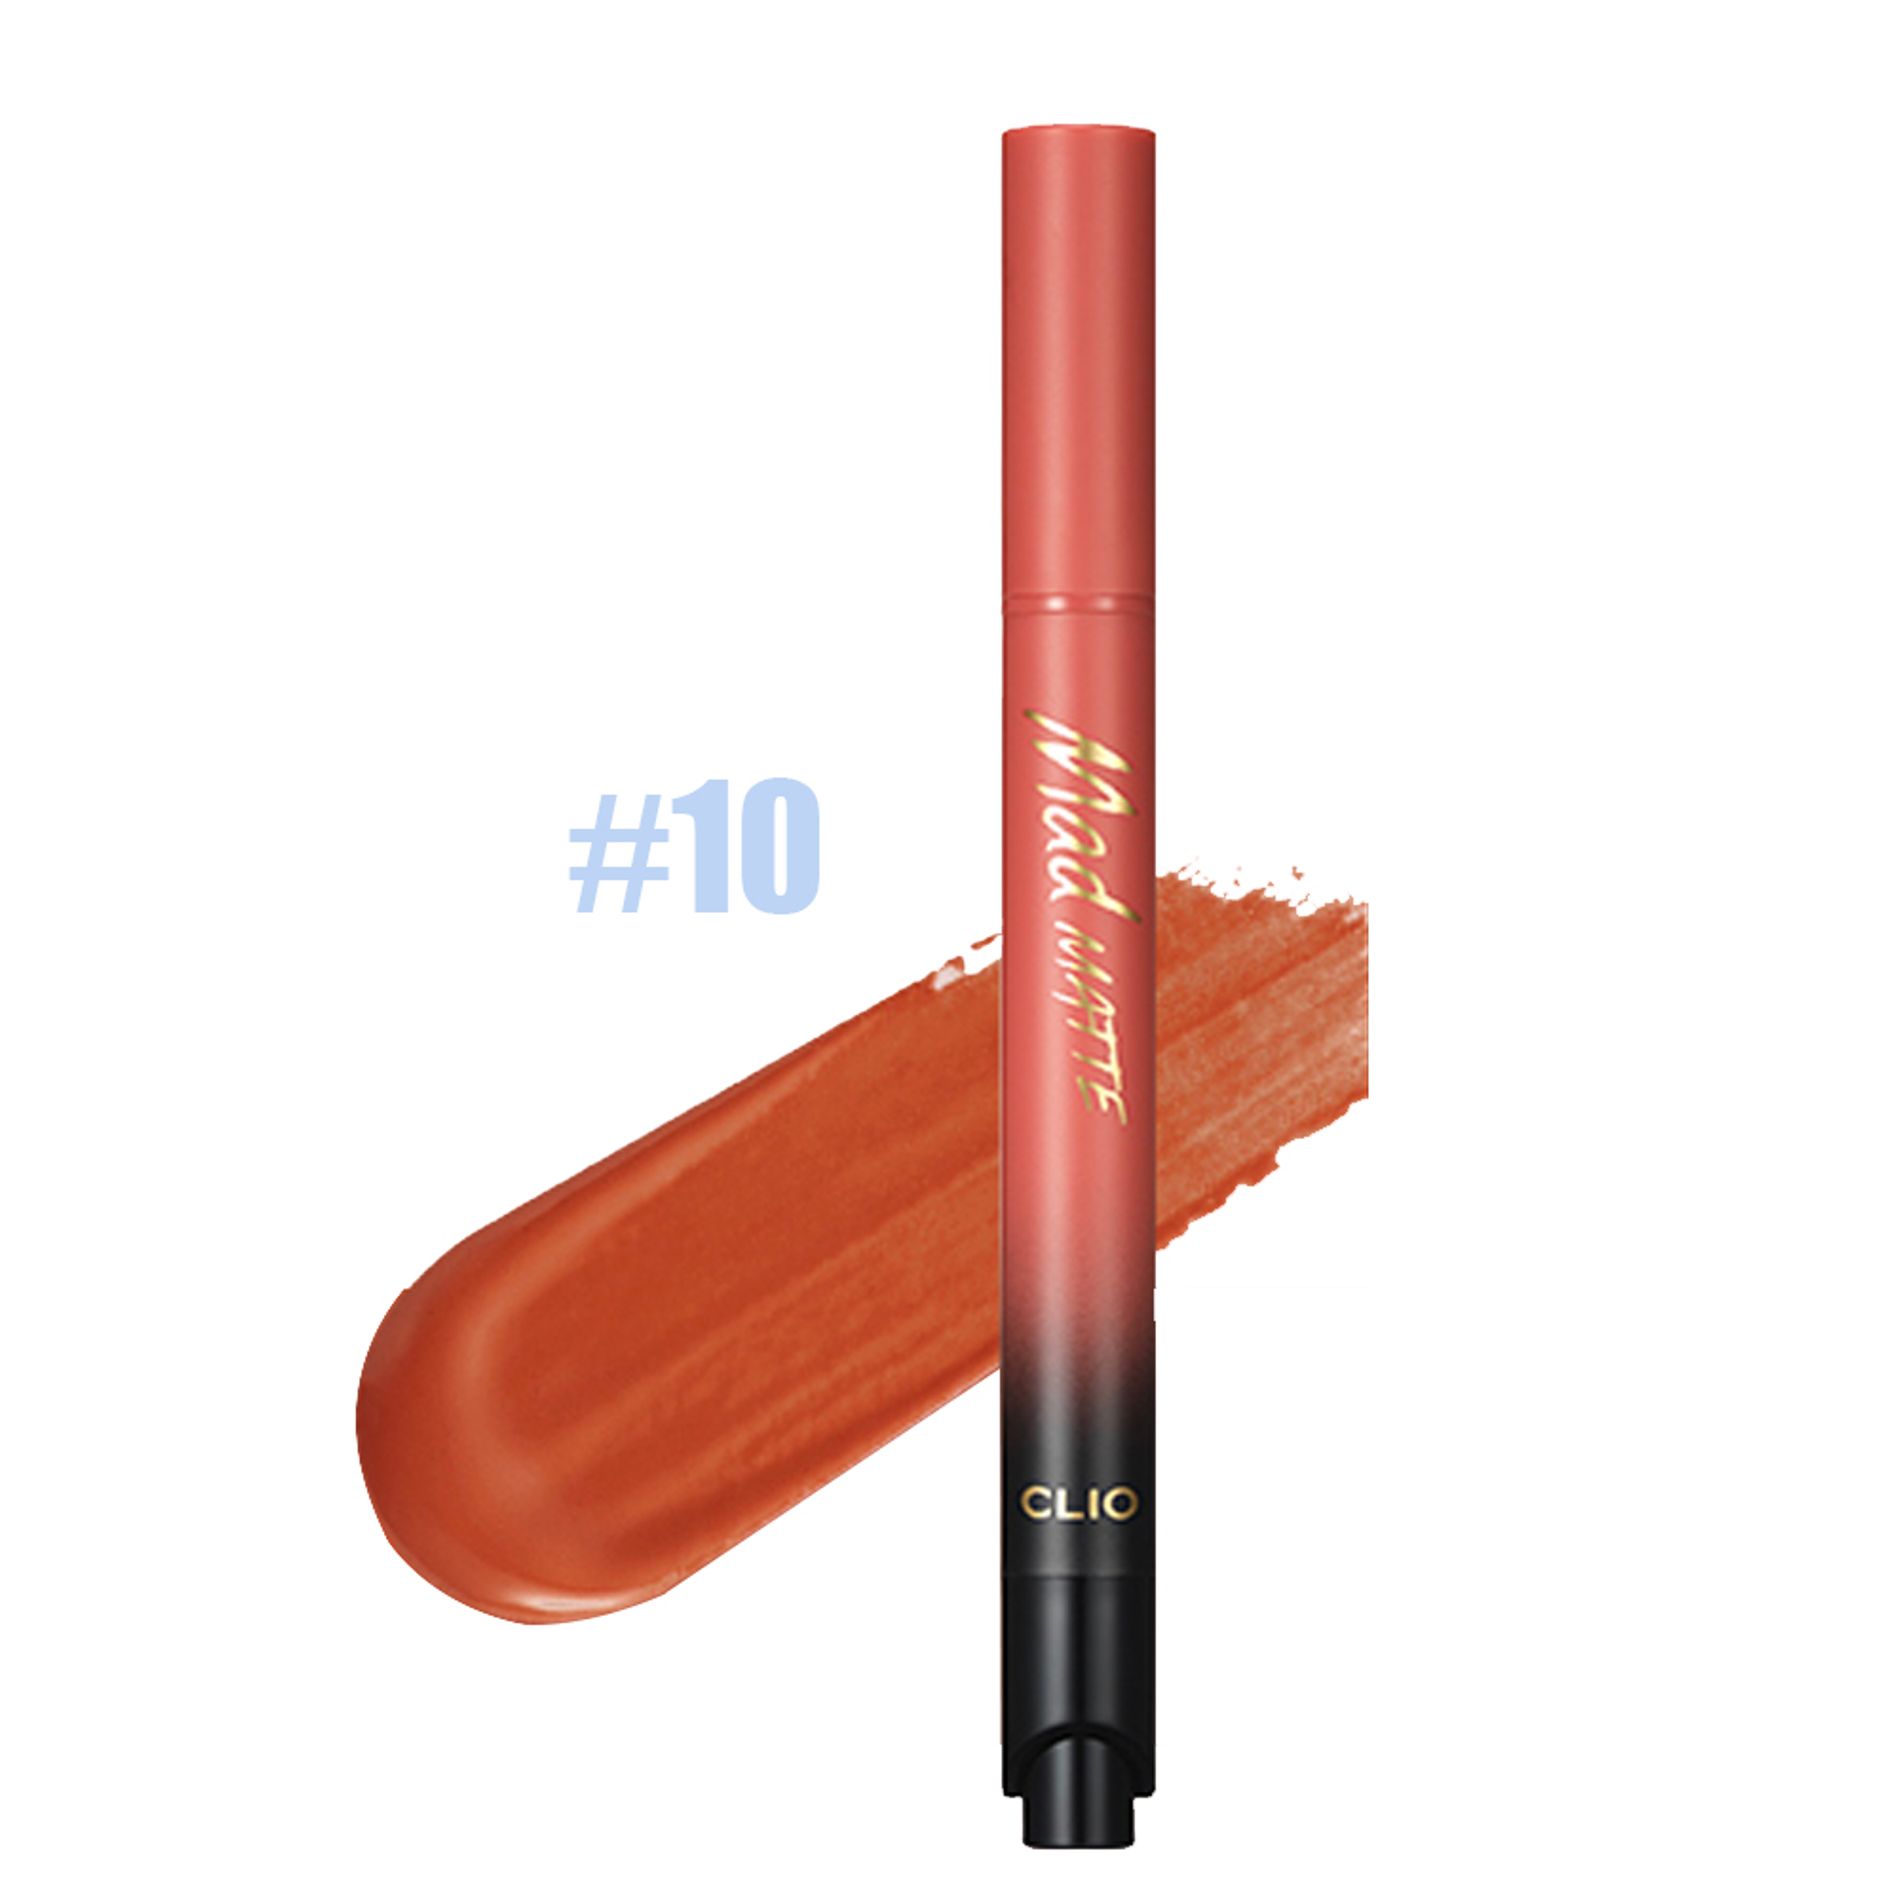 son-nuoc-dang-bam-clio-mad-matte-stain-tint-2g-16